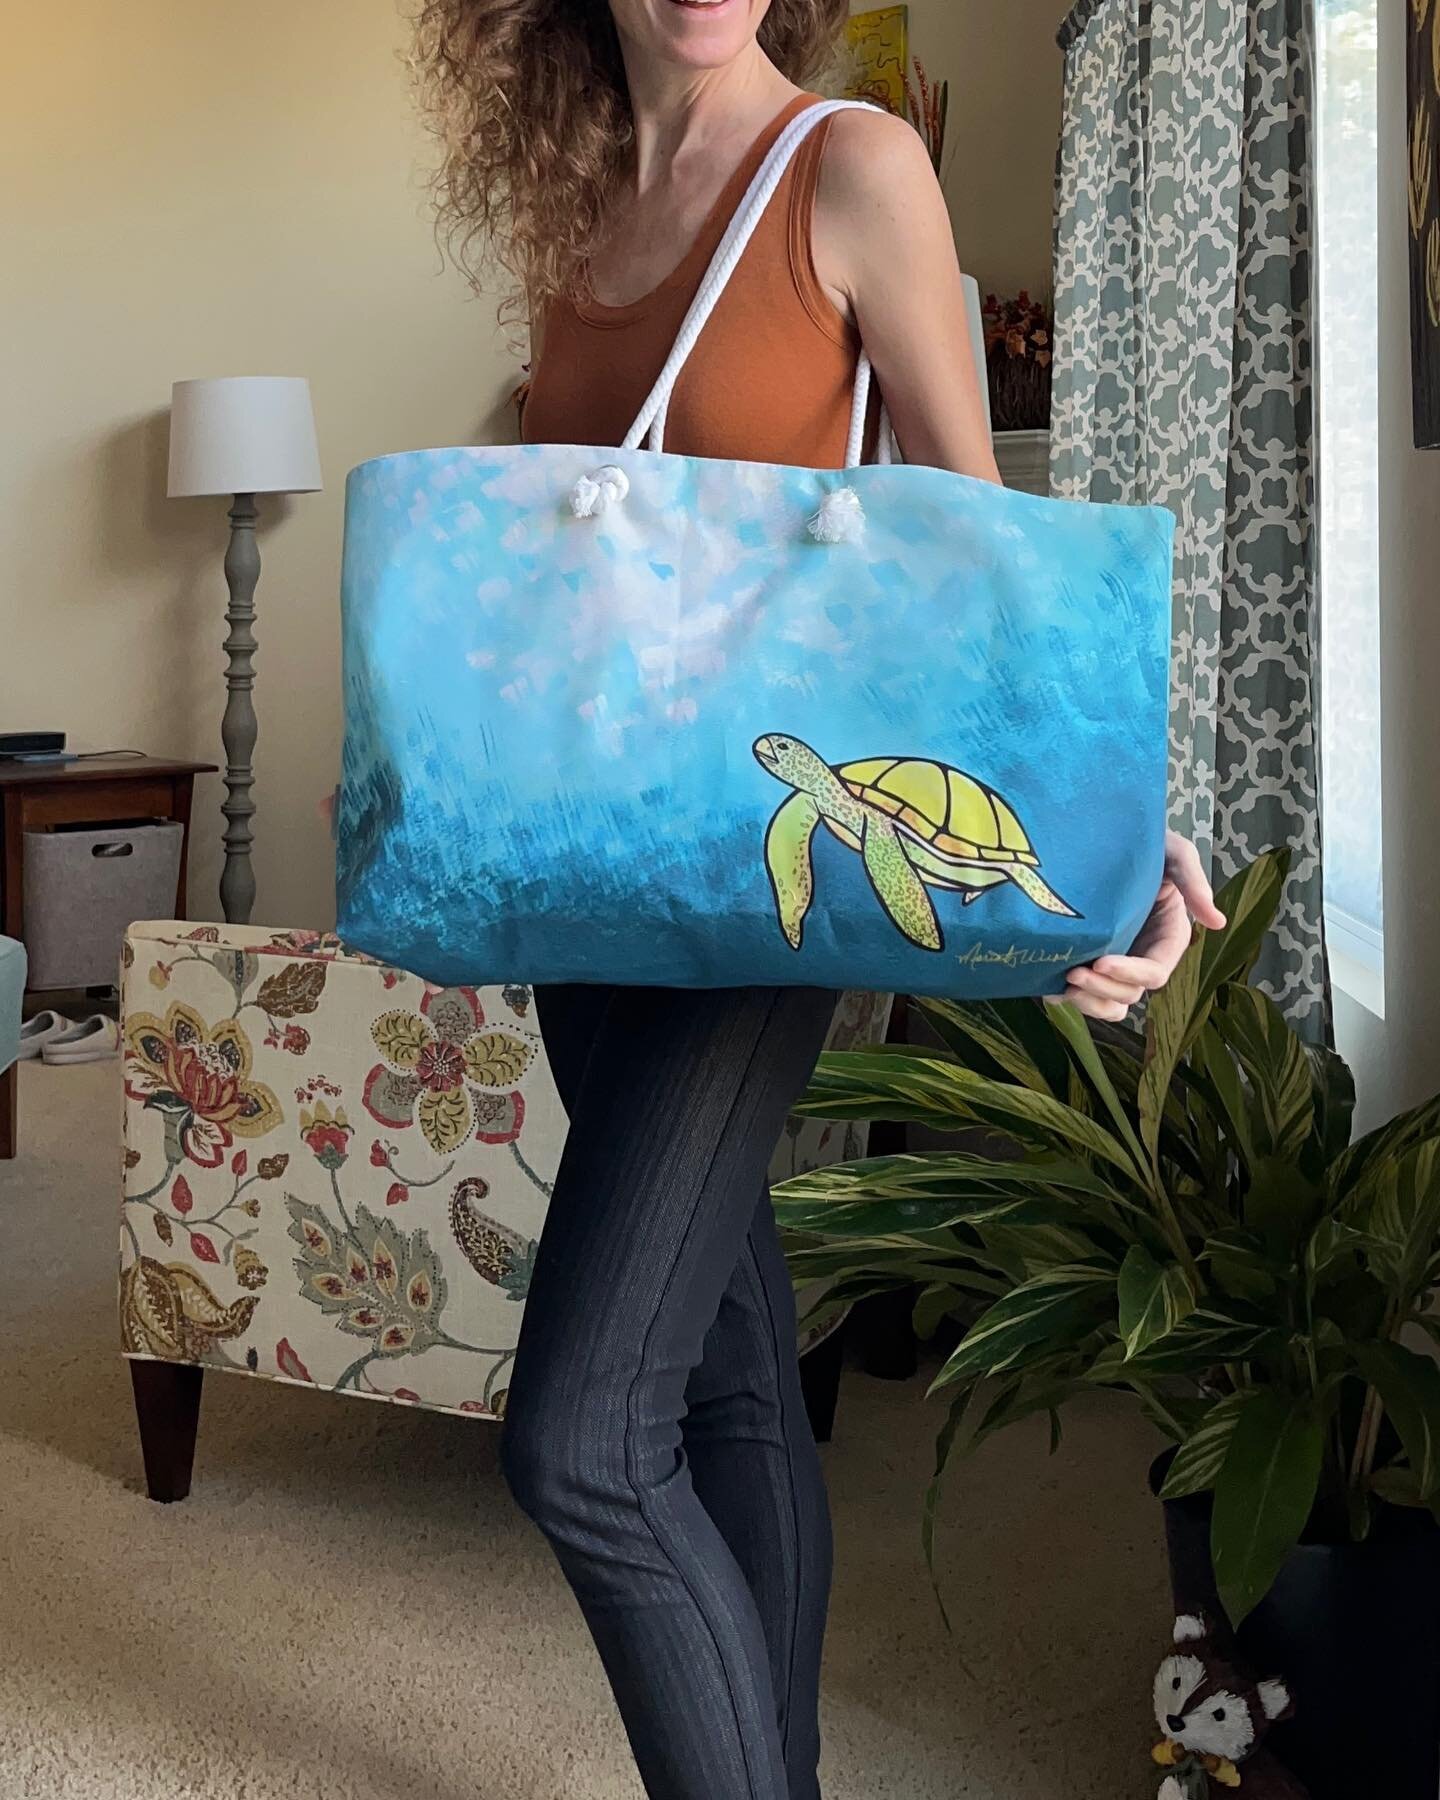 My Little Honu Weekender Tote just arrived! Get yours at www.mariahwest.com!